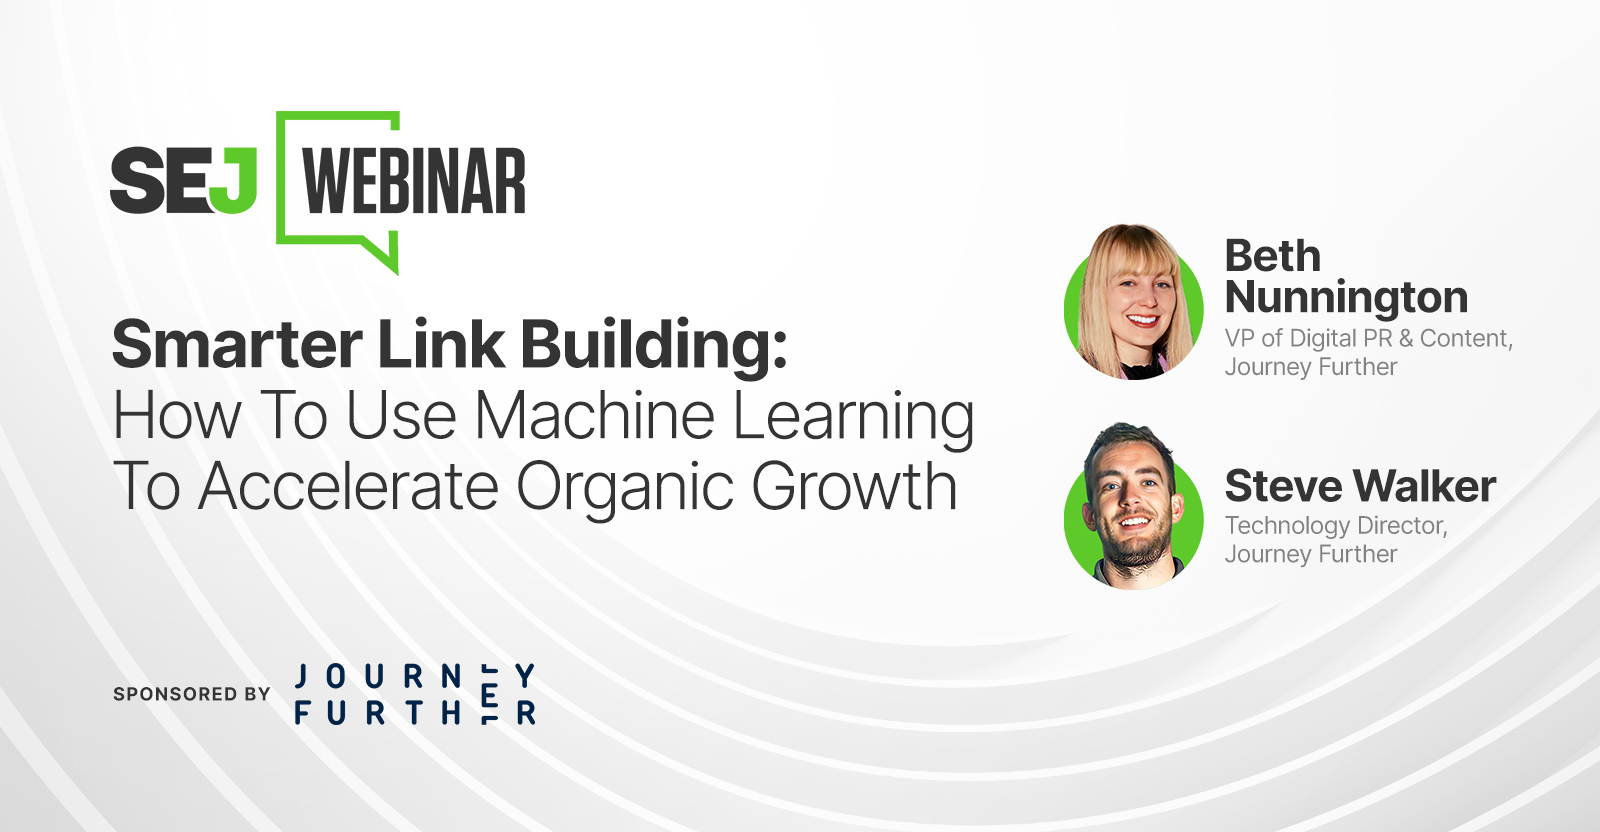 Smarter Link Building: How To Use Machine Learning To Accelerate Organic Growth